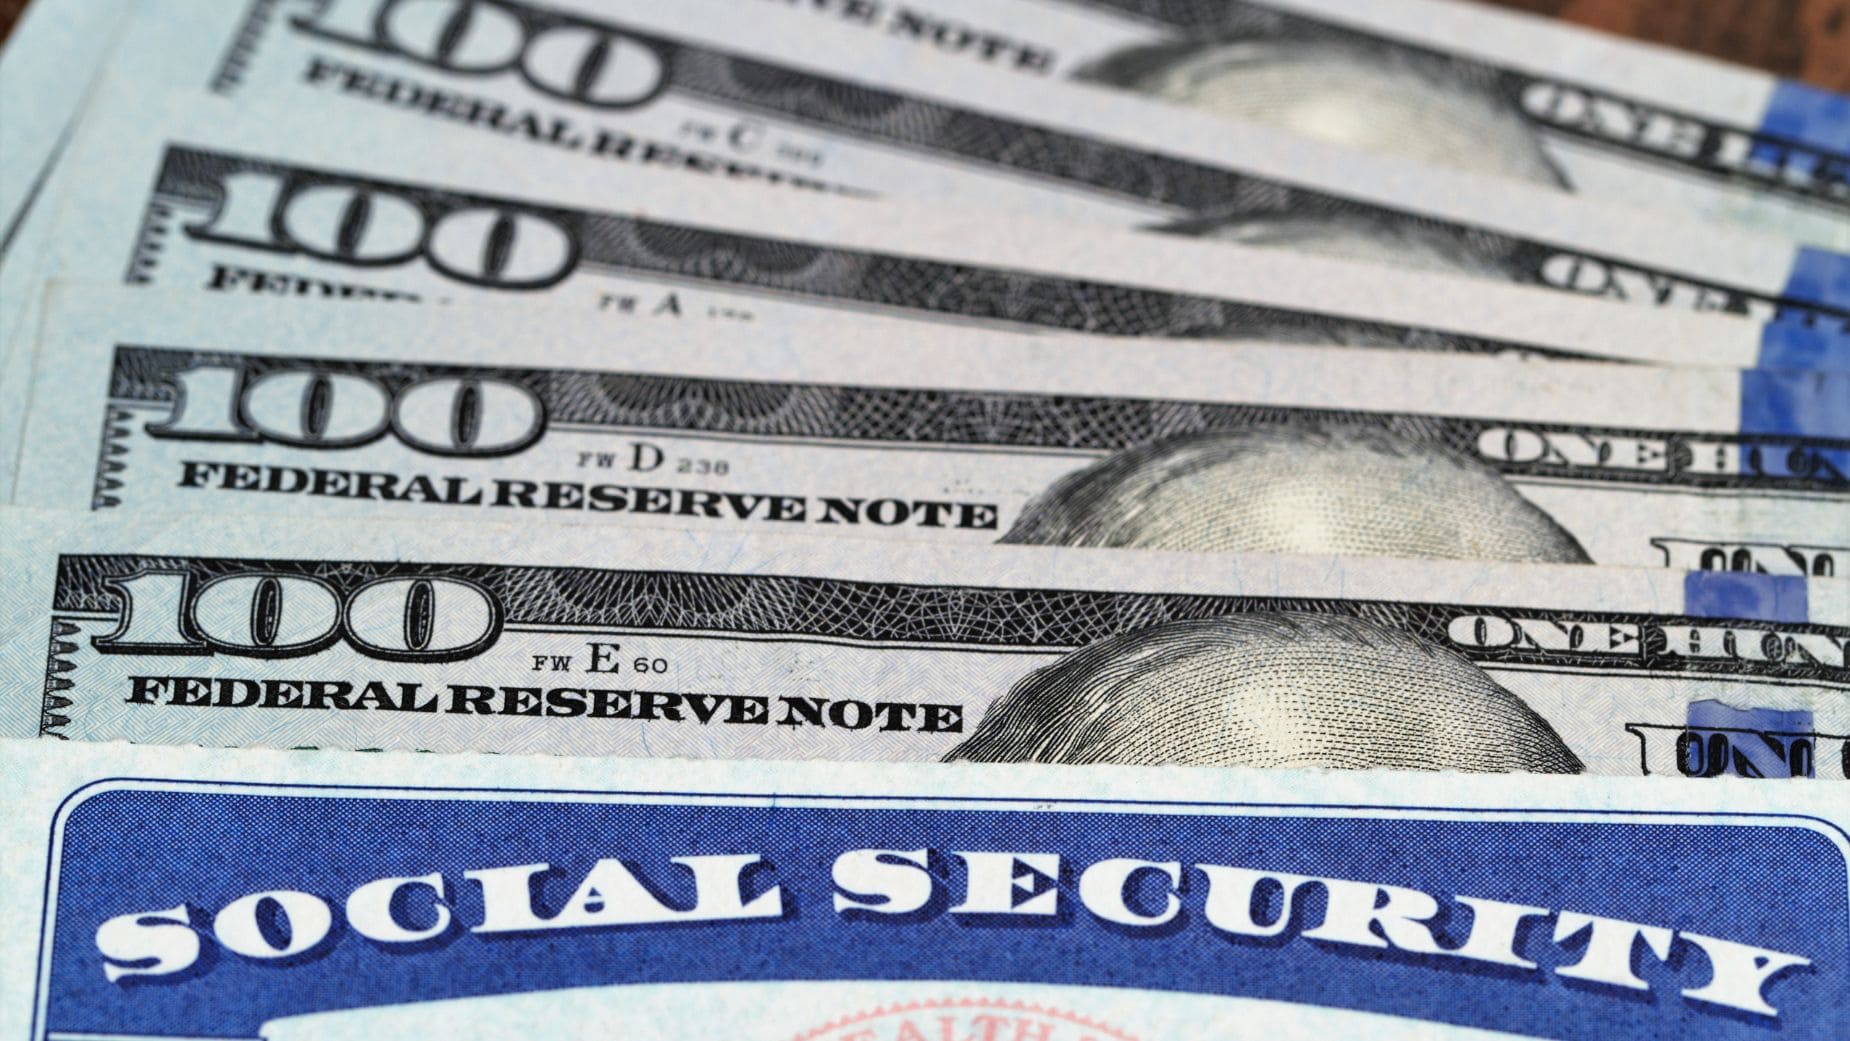 You could get a new Social Security today just by meeting some requirements